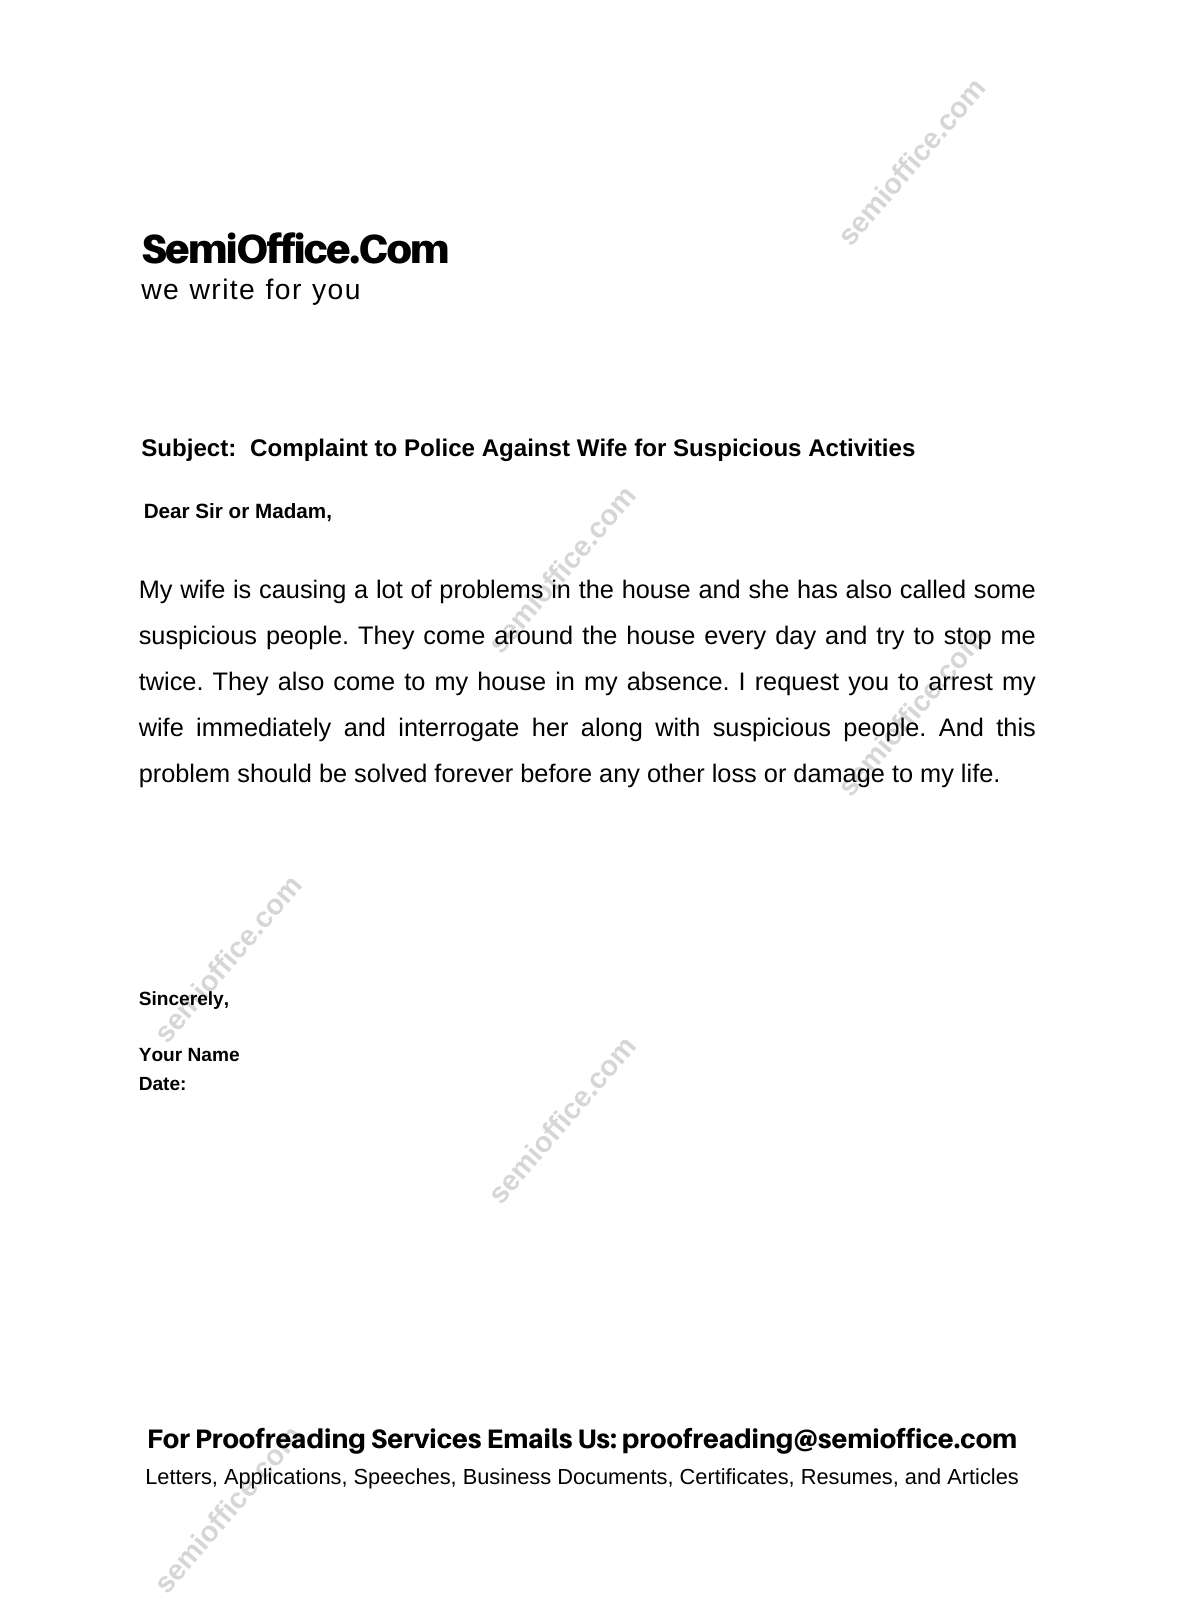 Complaint Letter to Police Station Against Wife SemiOffice image